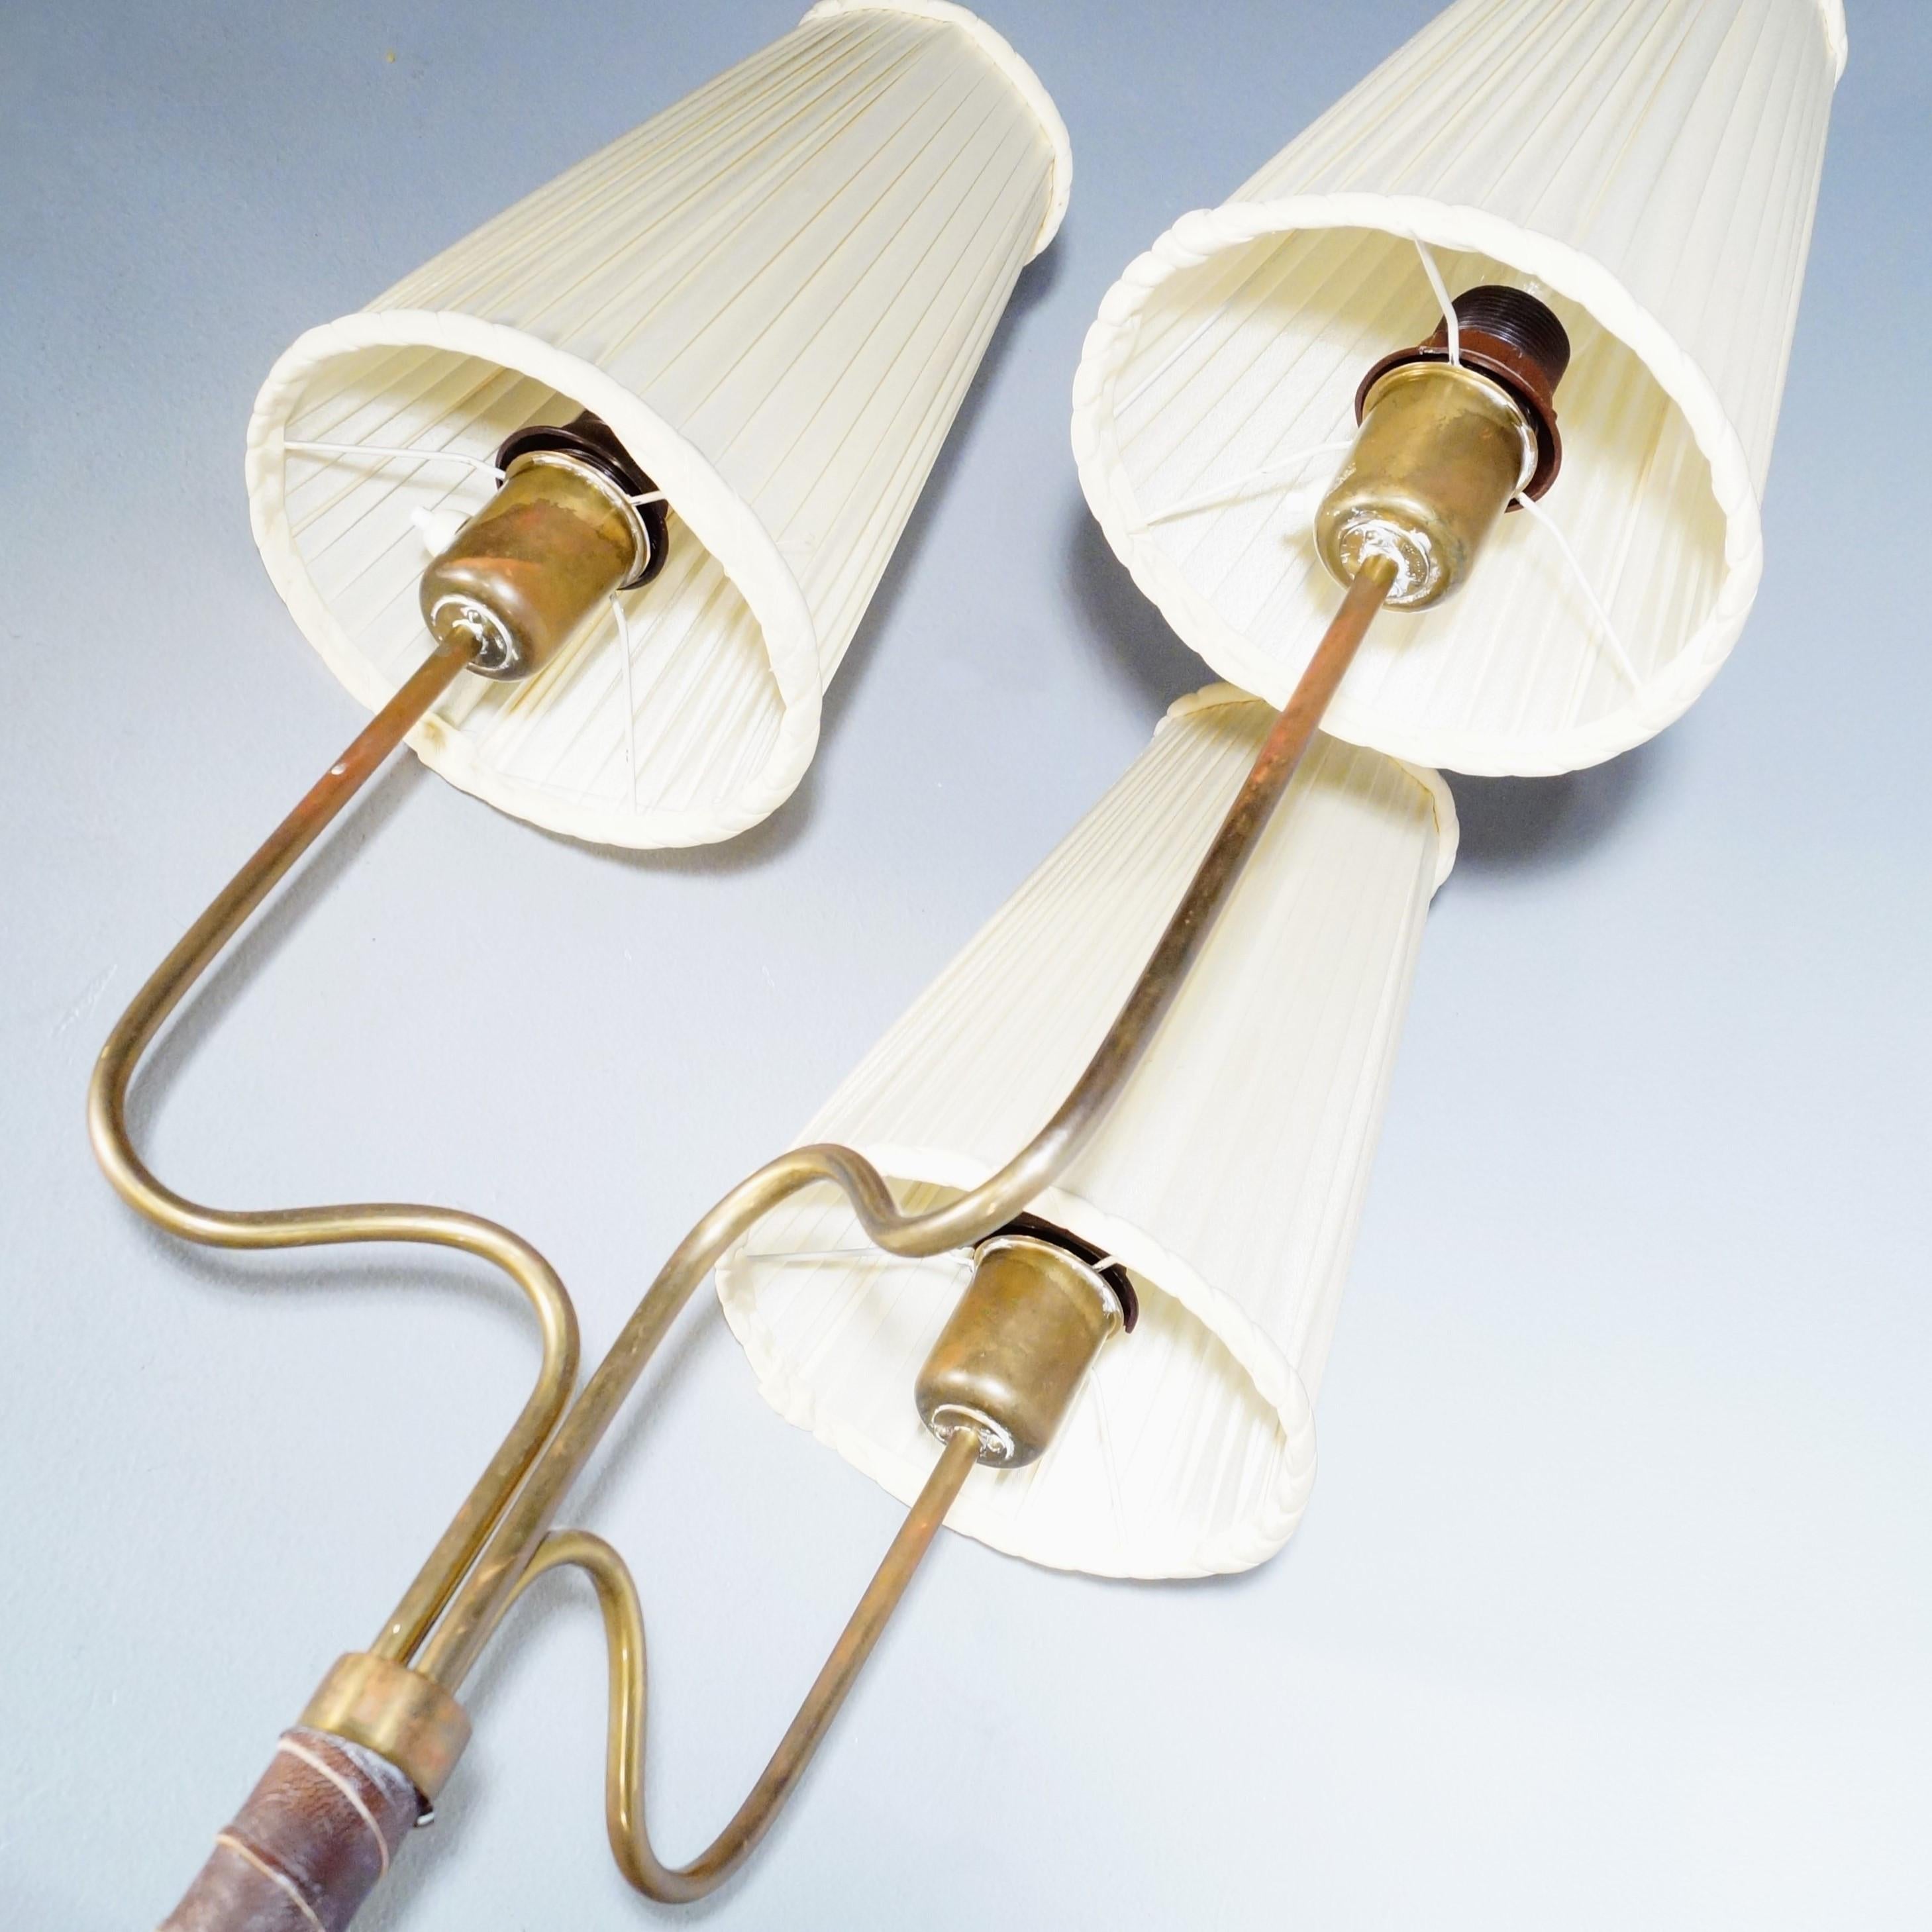 Steel Rare Floor Lamp by Hans Bergström for ASEA from the 1946s For Sale